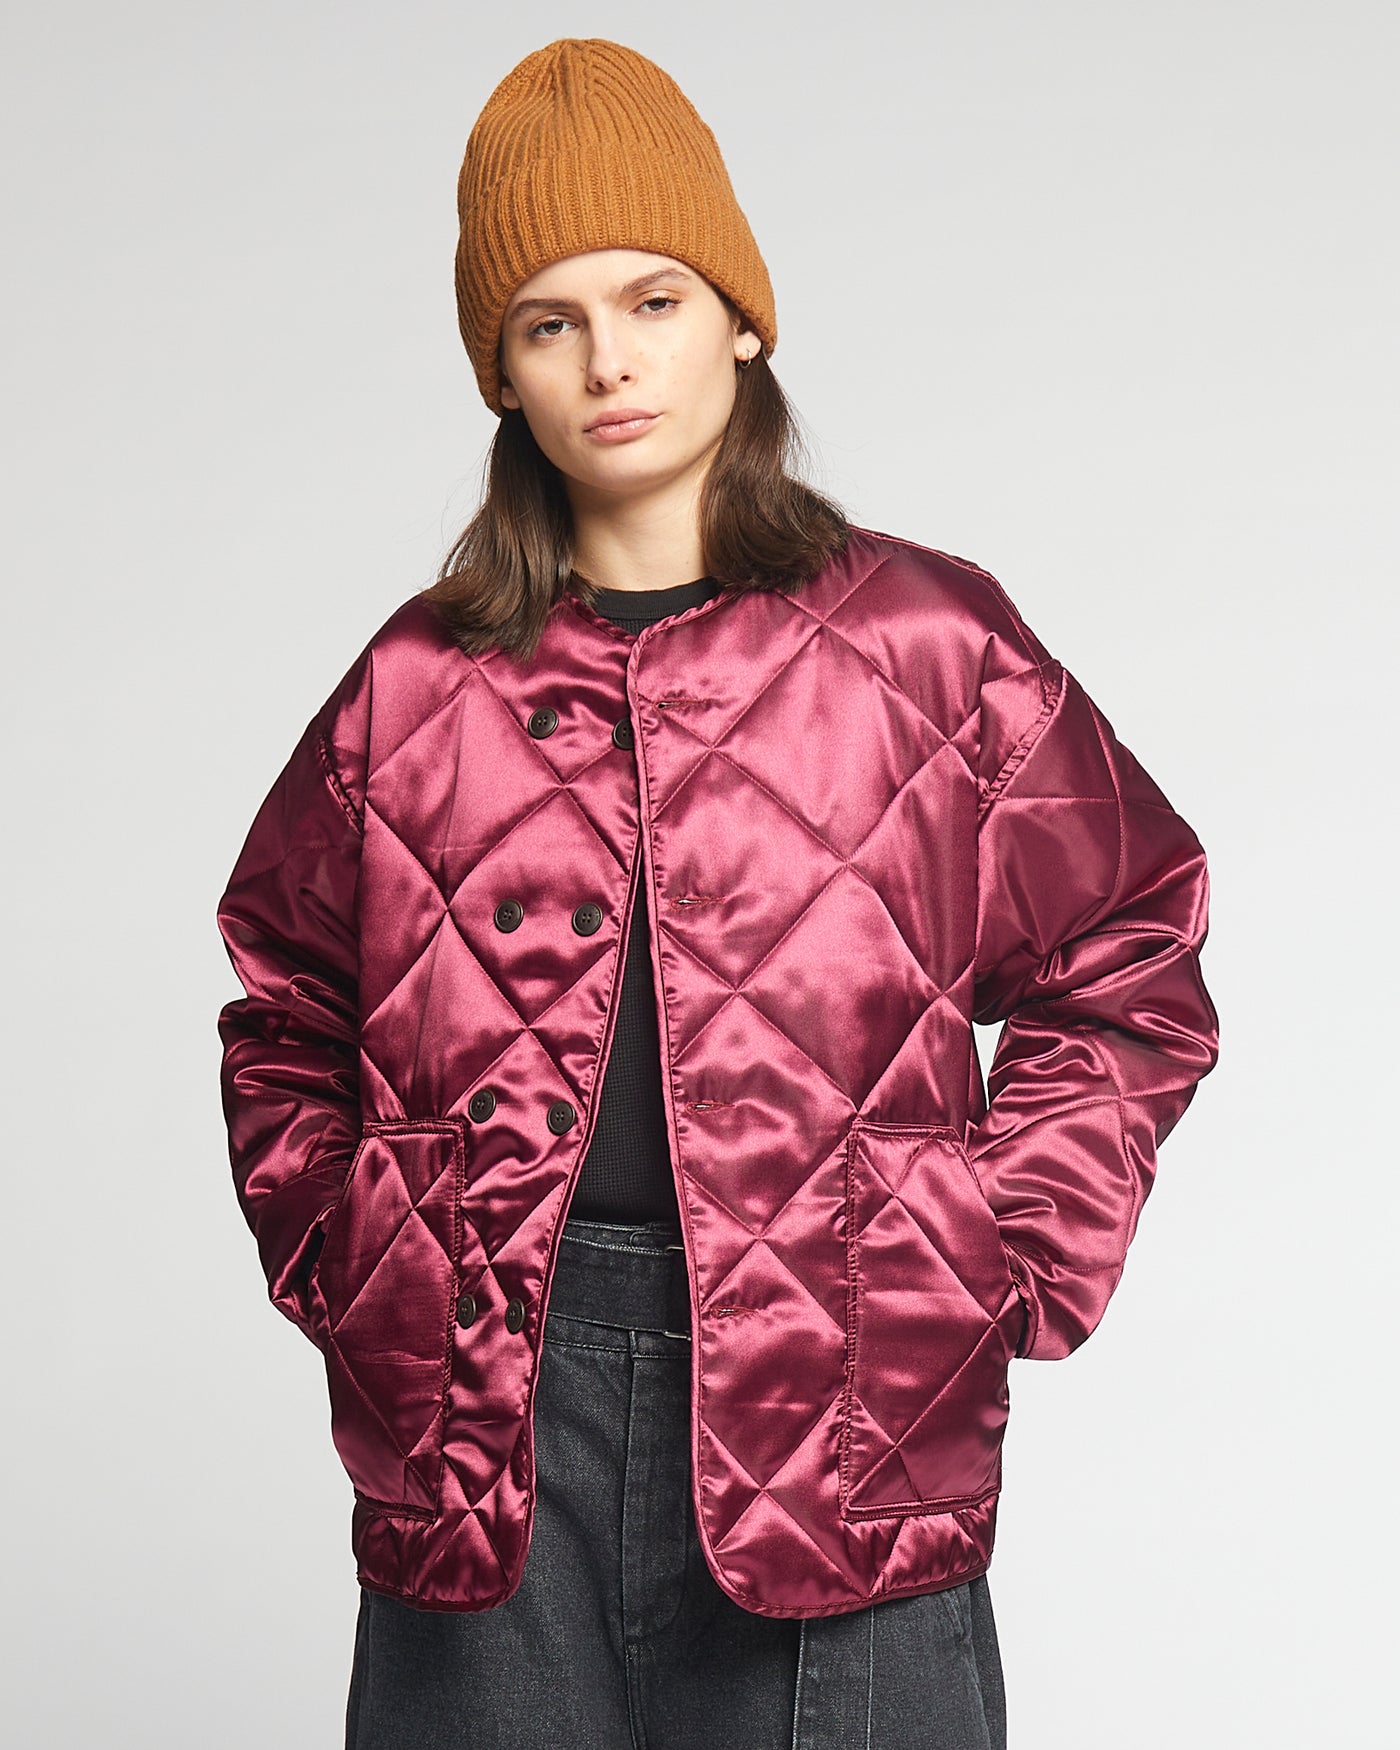 G.o.D Frostbite Diamond Quilted Nylon Jacket  Wine